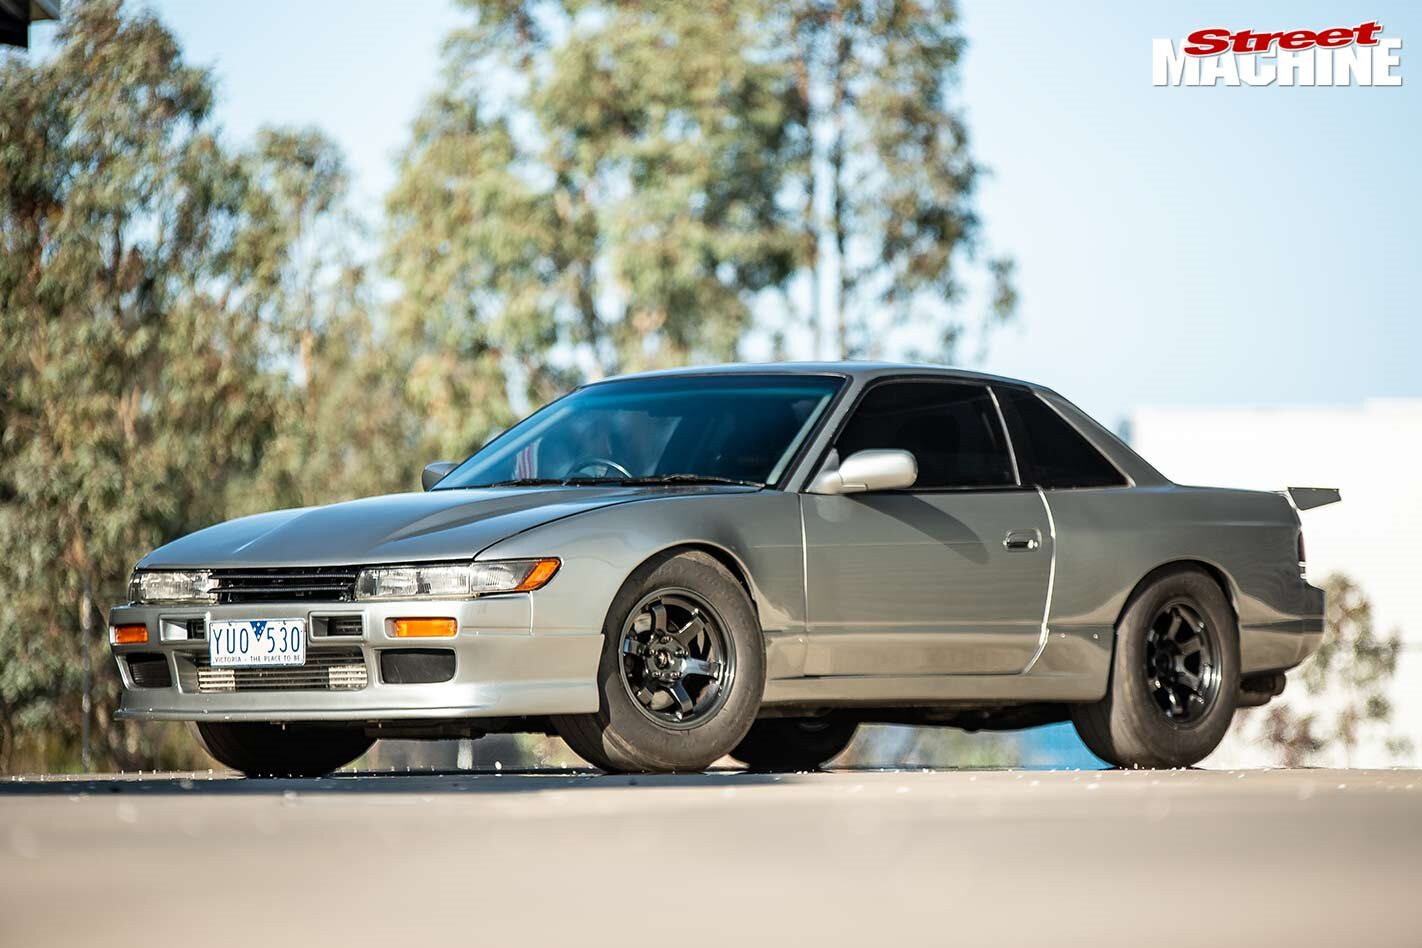 Eight-second, all-wheel-drive Nissan Silvia coming to Drag Challenge 2019